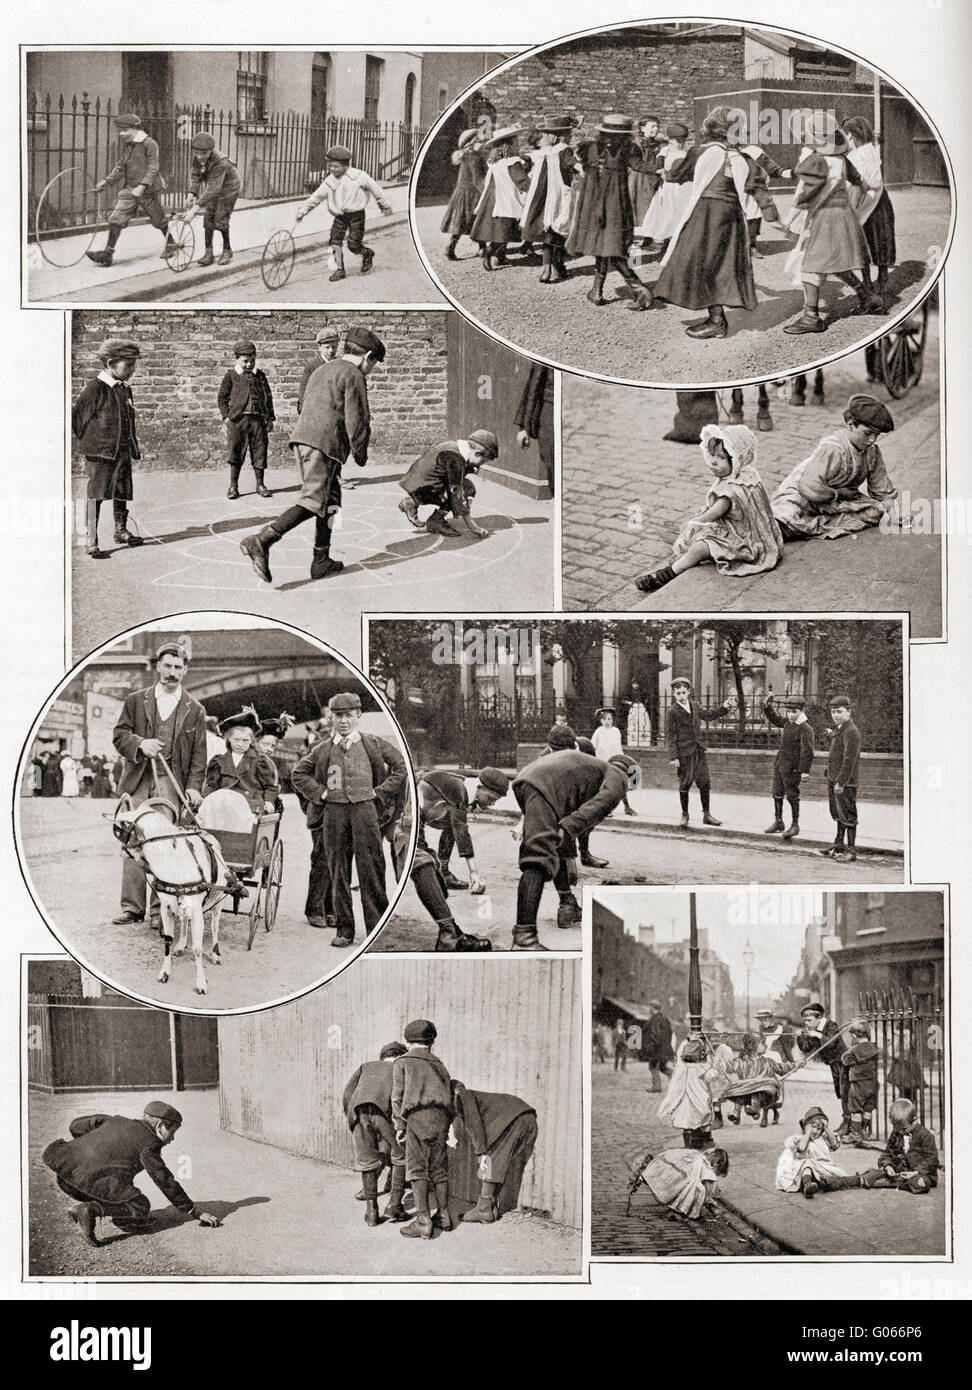 Children's games in the early 20th century, from top left, 1. Wheels and hoop  2. Kiss-in-the-ring  3.  Spider's Web   4.  Five Stones  5.  Goat-shay 6.  Gully 7.  Cherry-bobs  8.  Swinging. Stock Photo